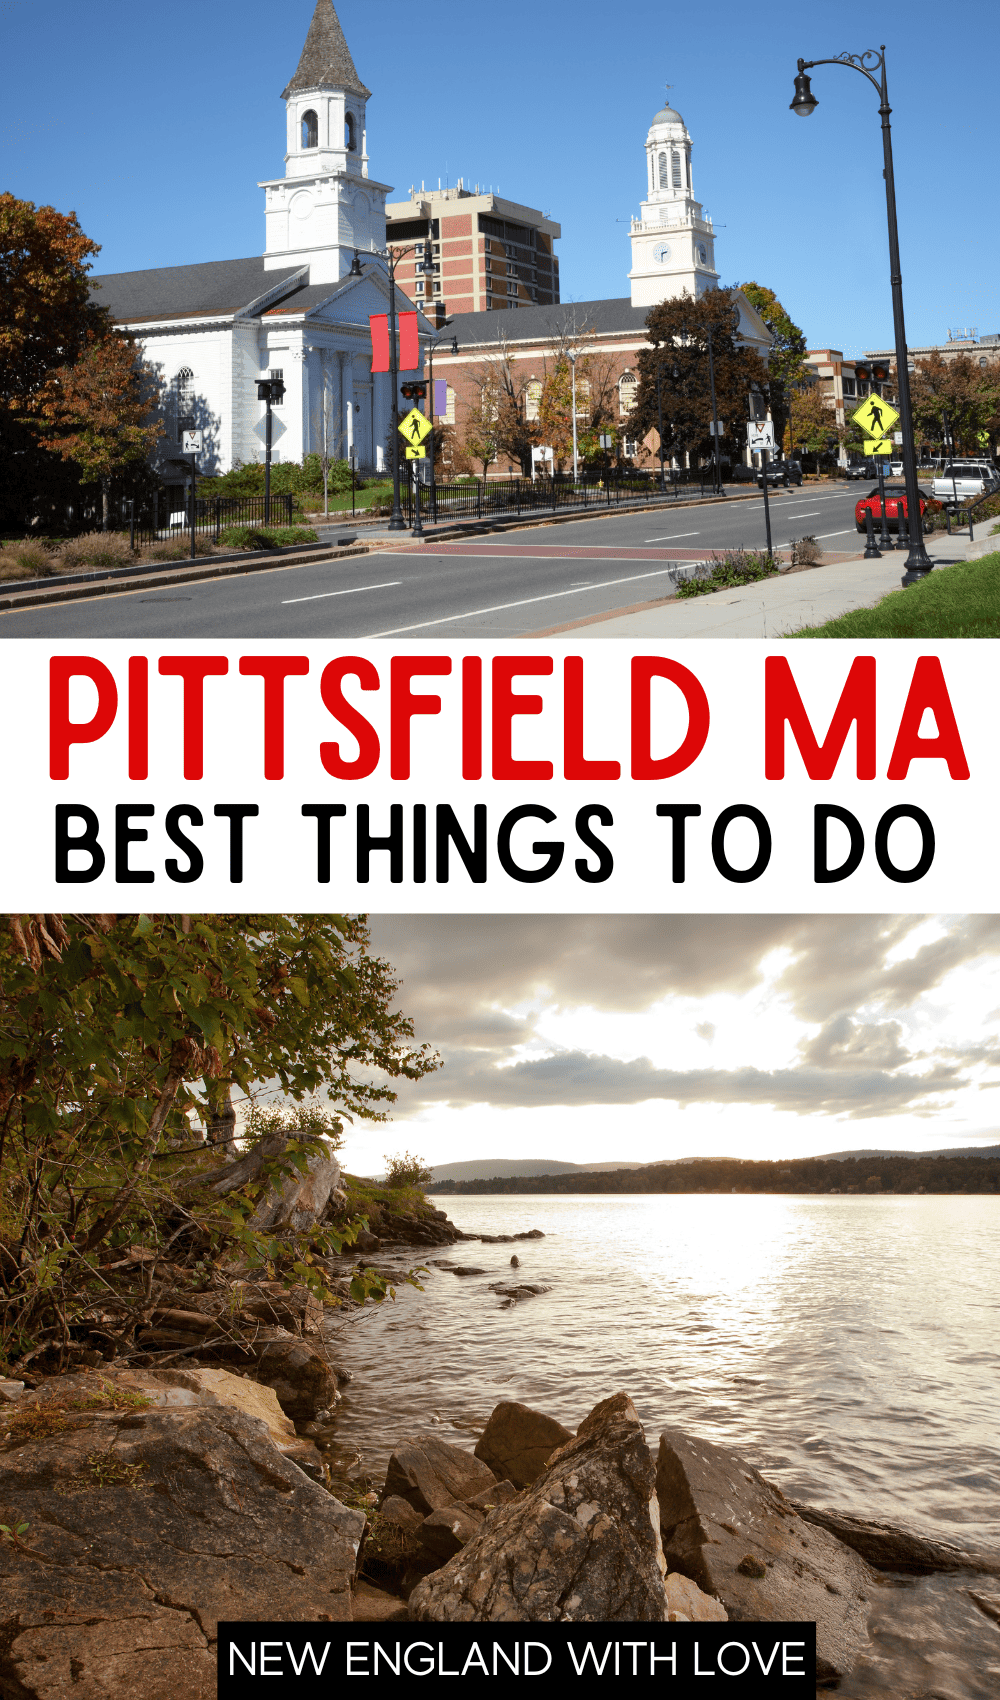 Pinnable Image that reads “Things to do in Pittsfield MA” and has two photos of the town.